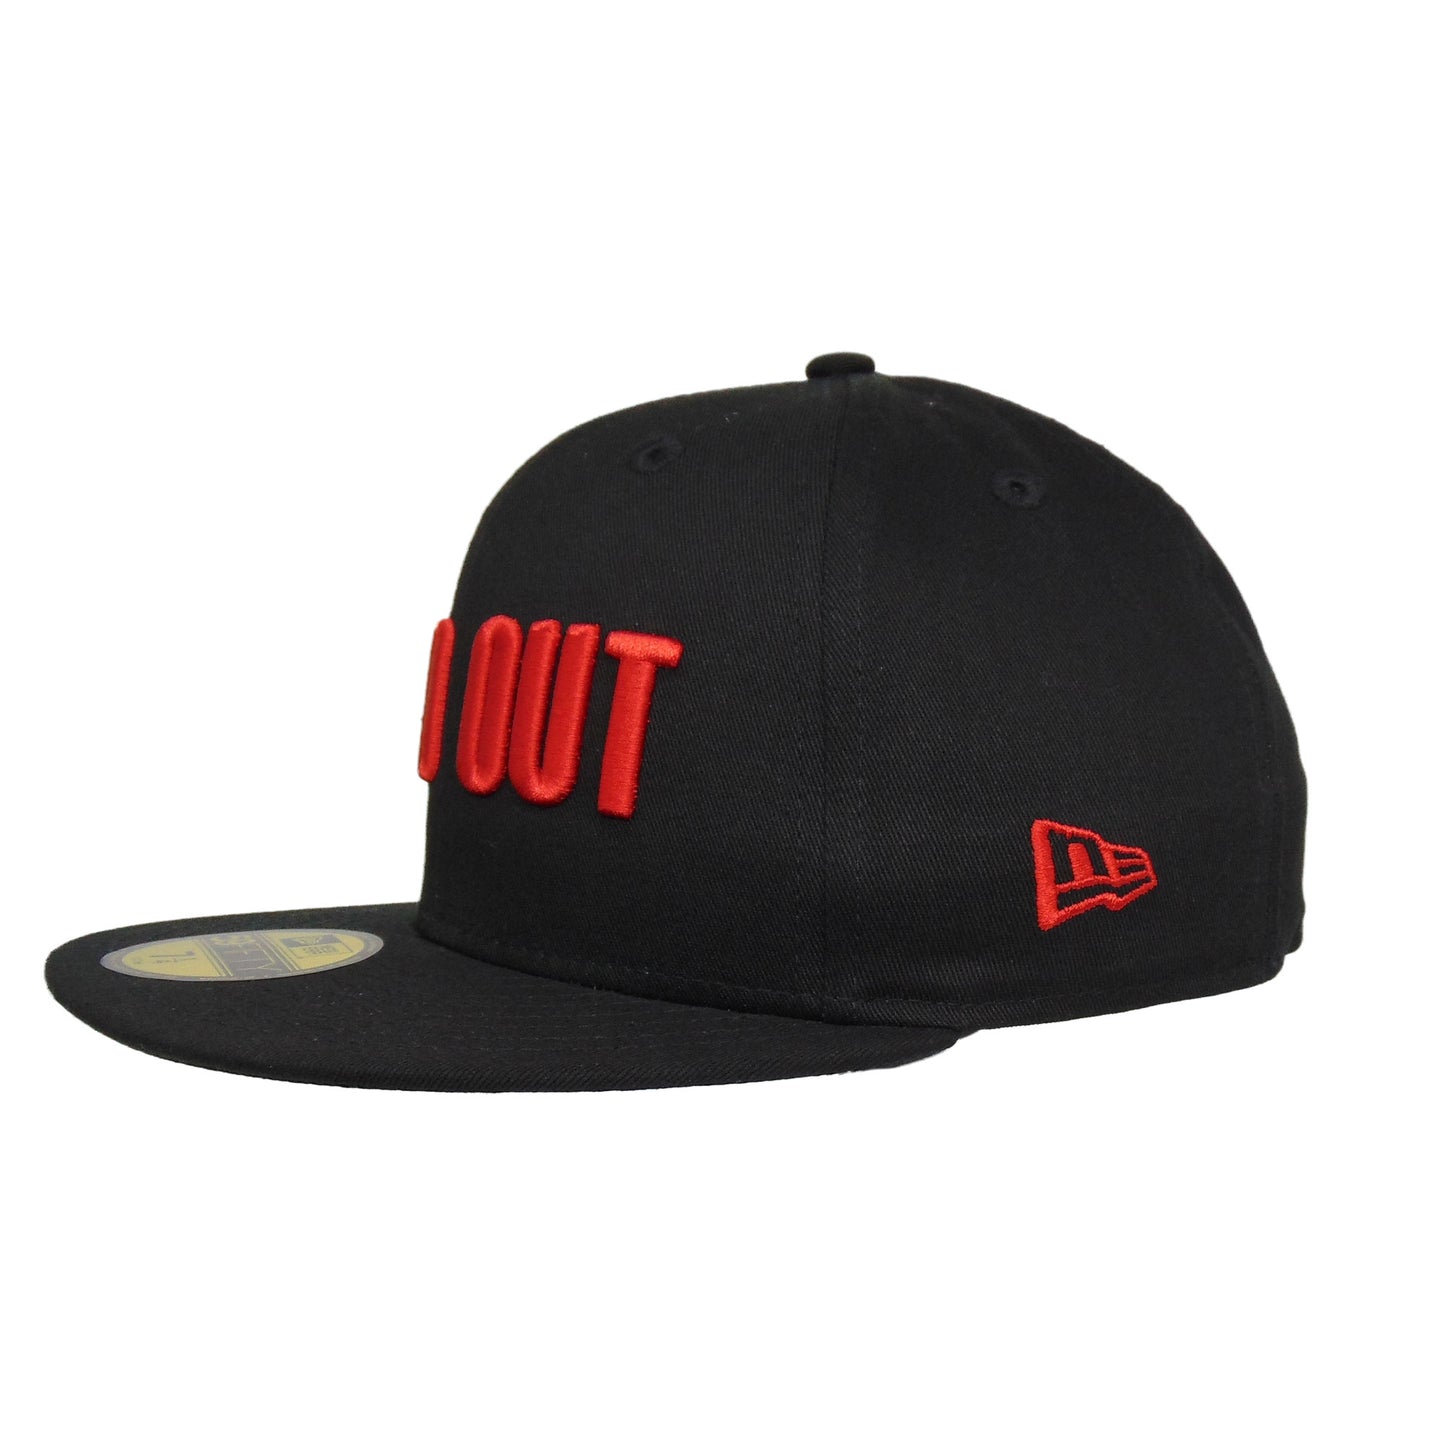 JustFitteds SOLD OUT New Era 59FIFTY Cap Black